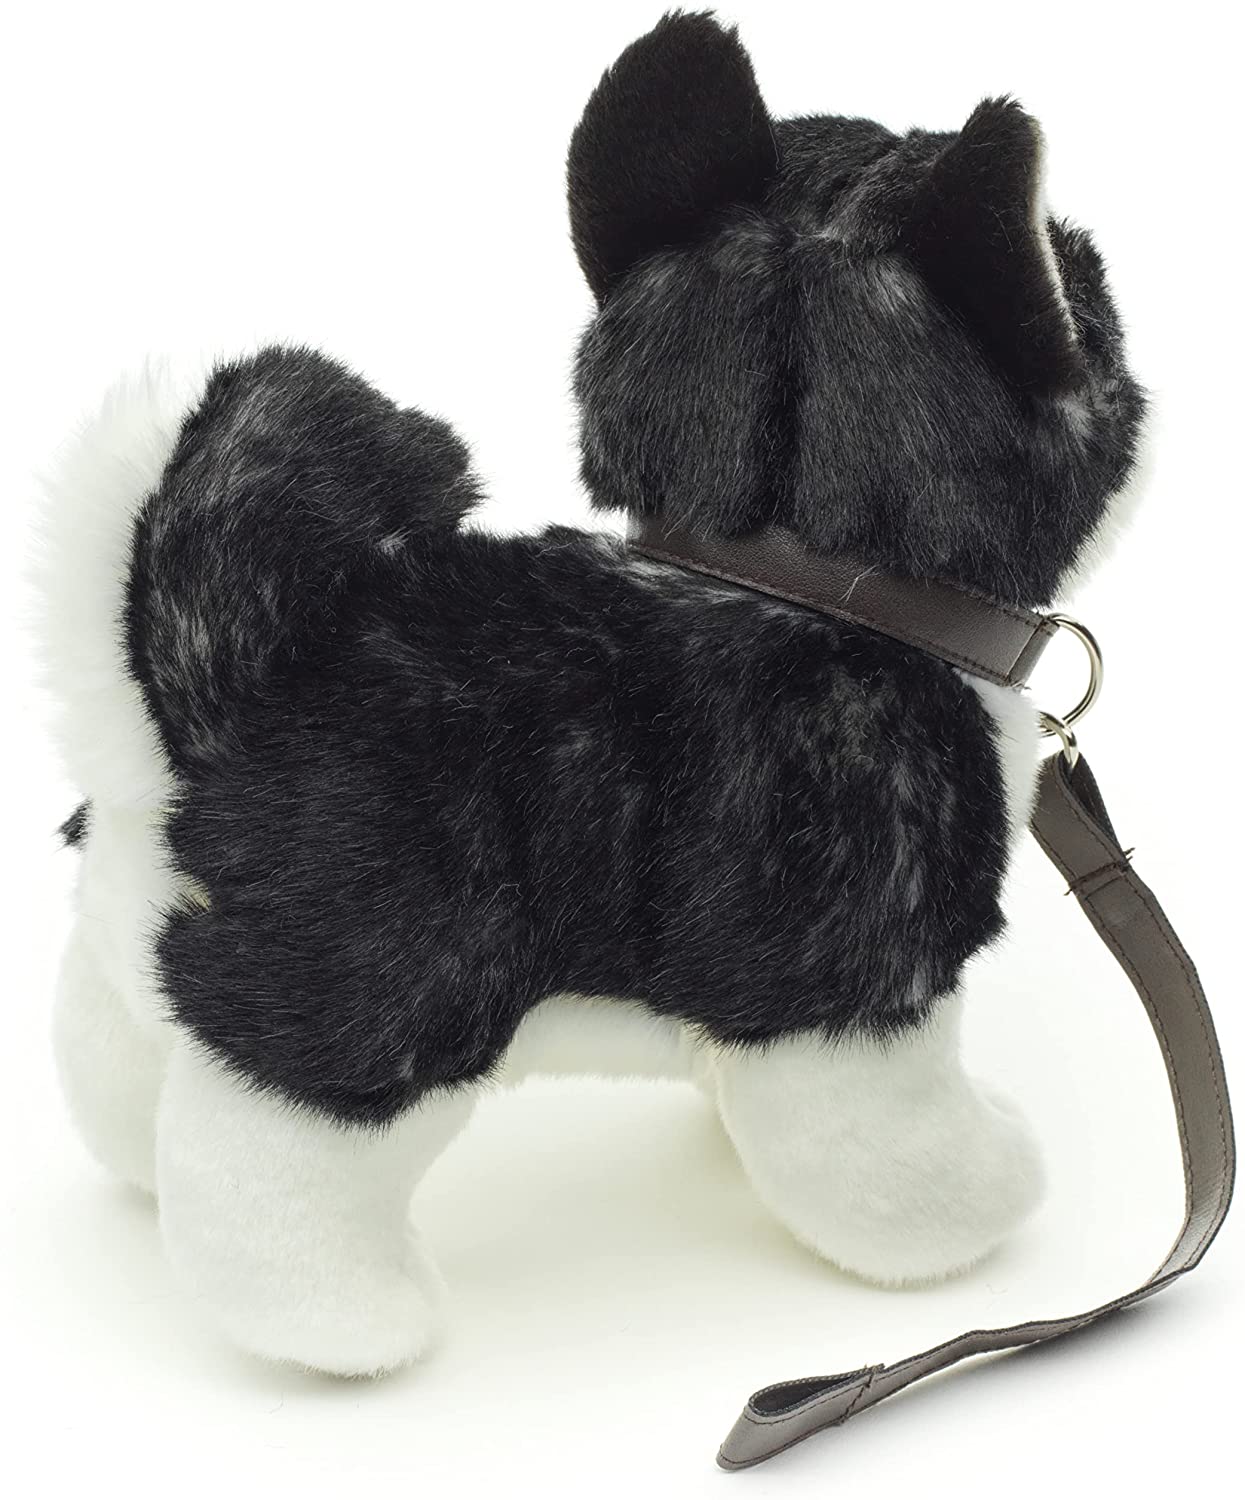 Husky Puppy (black), standing (with leash) - 21 cm (length) 